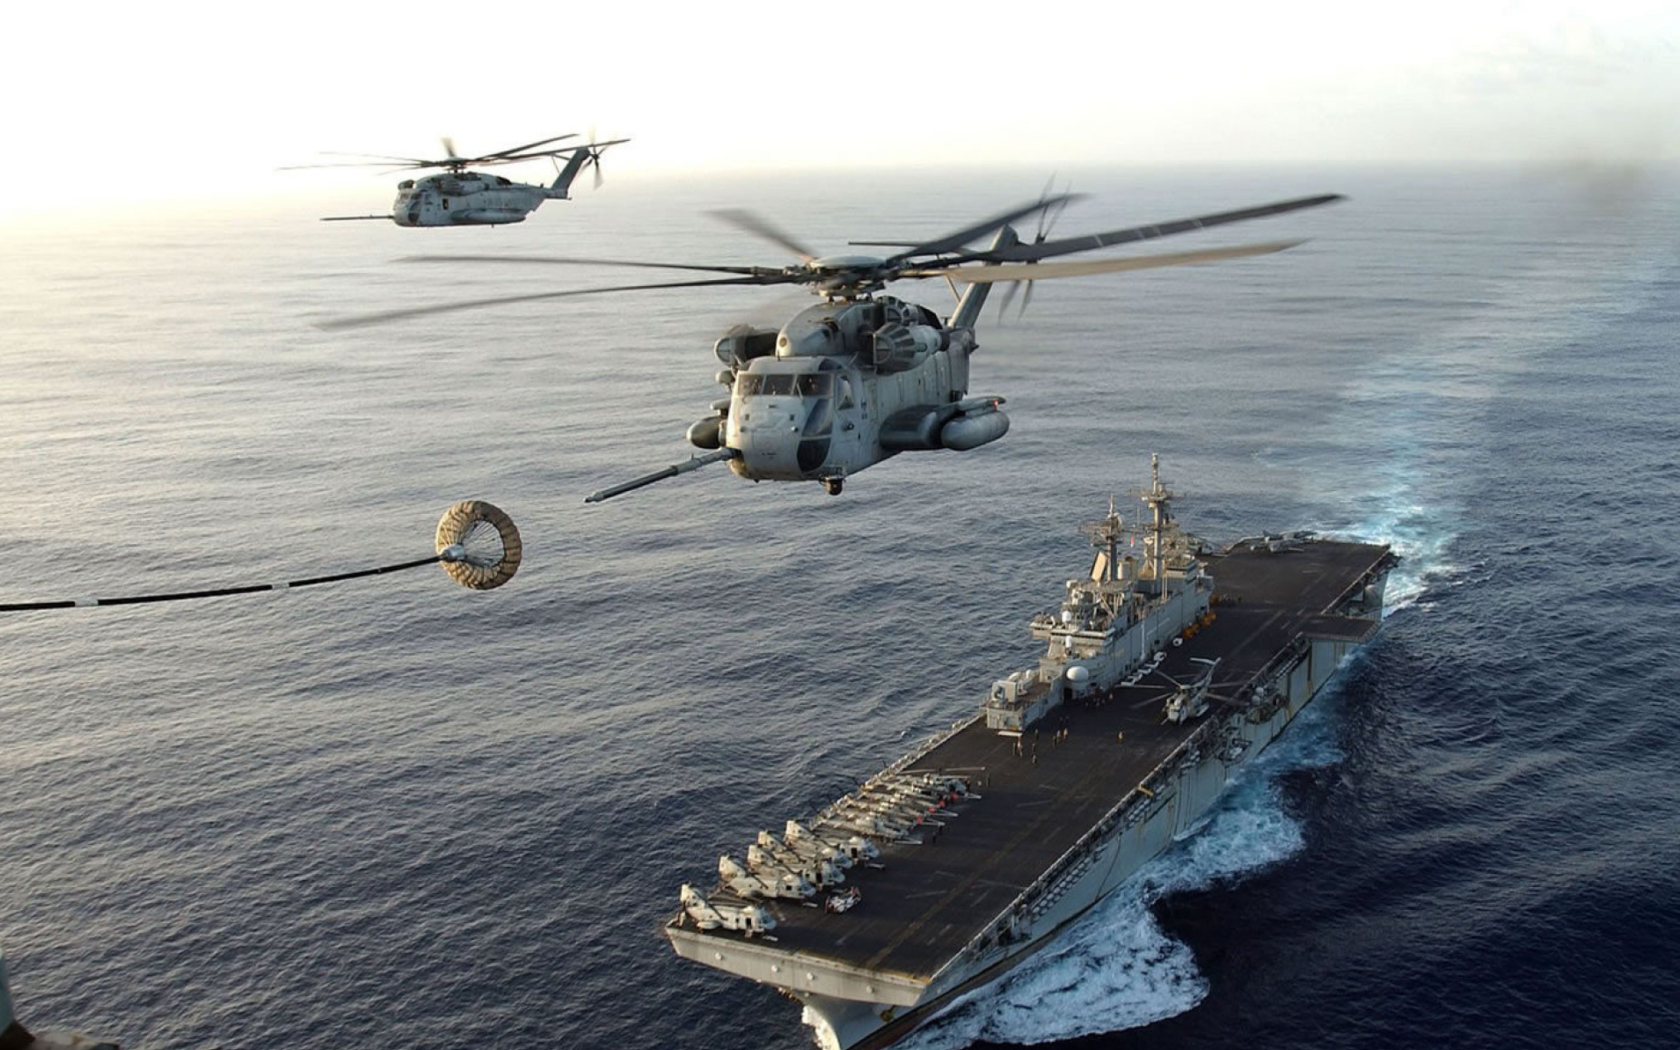 Das Aircraft Carrier And Helicopter Wallpaper 1680x1050